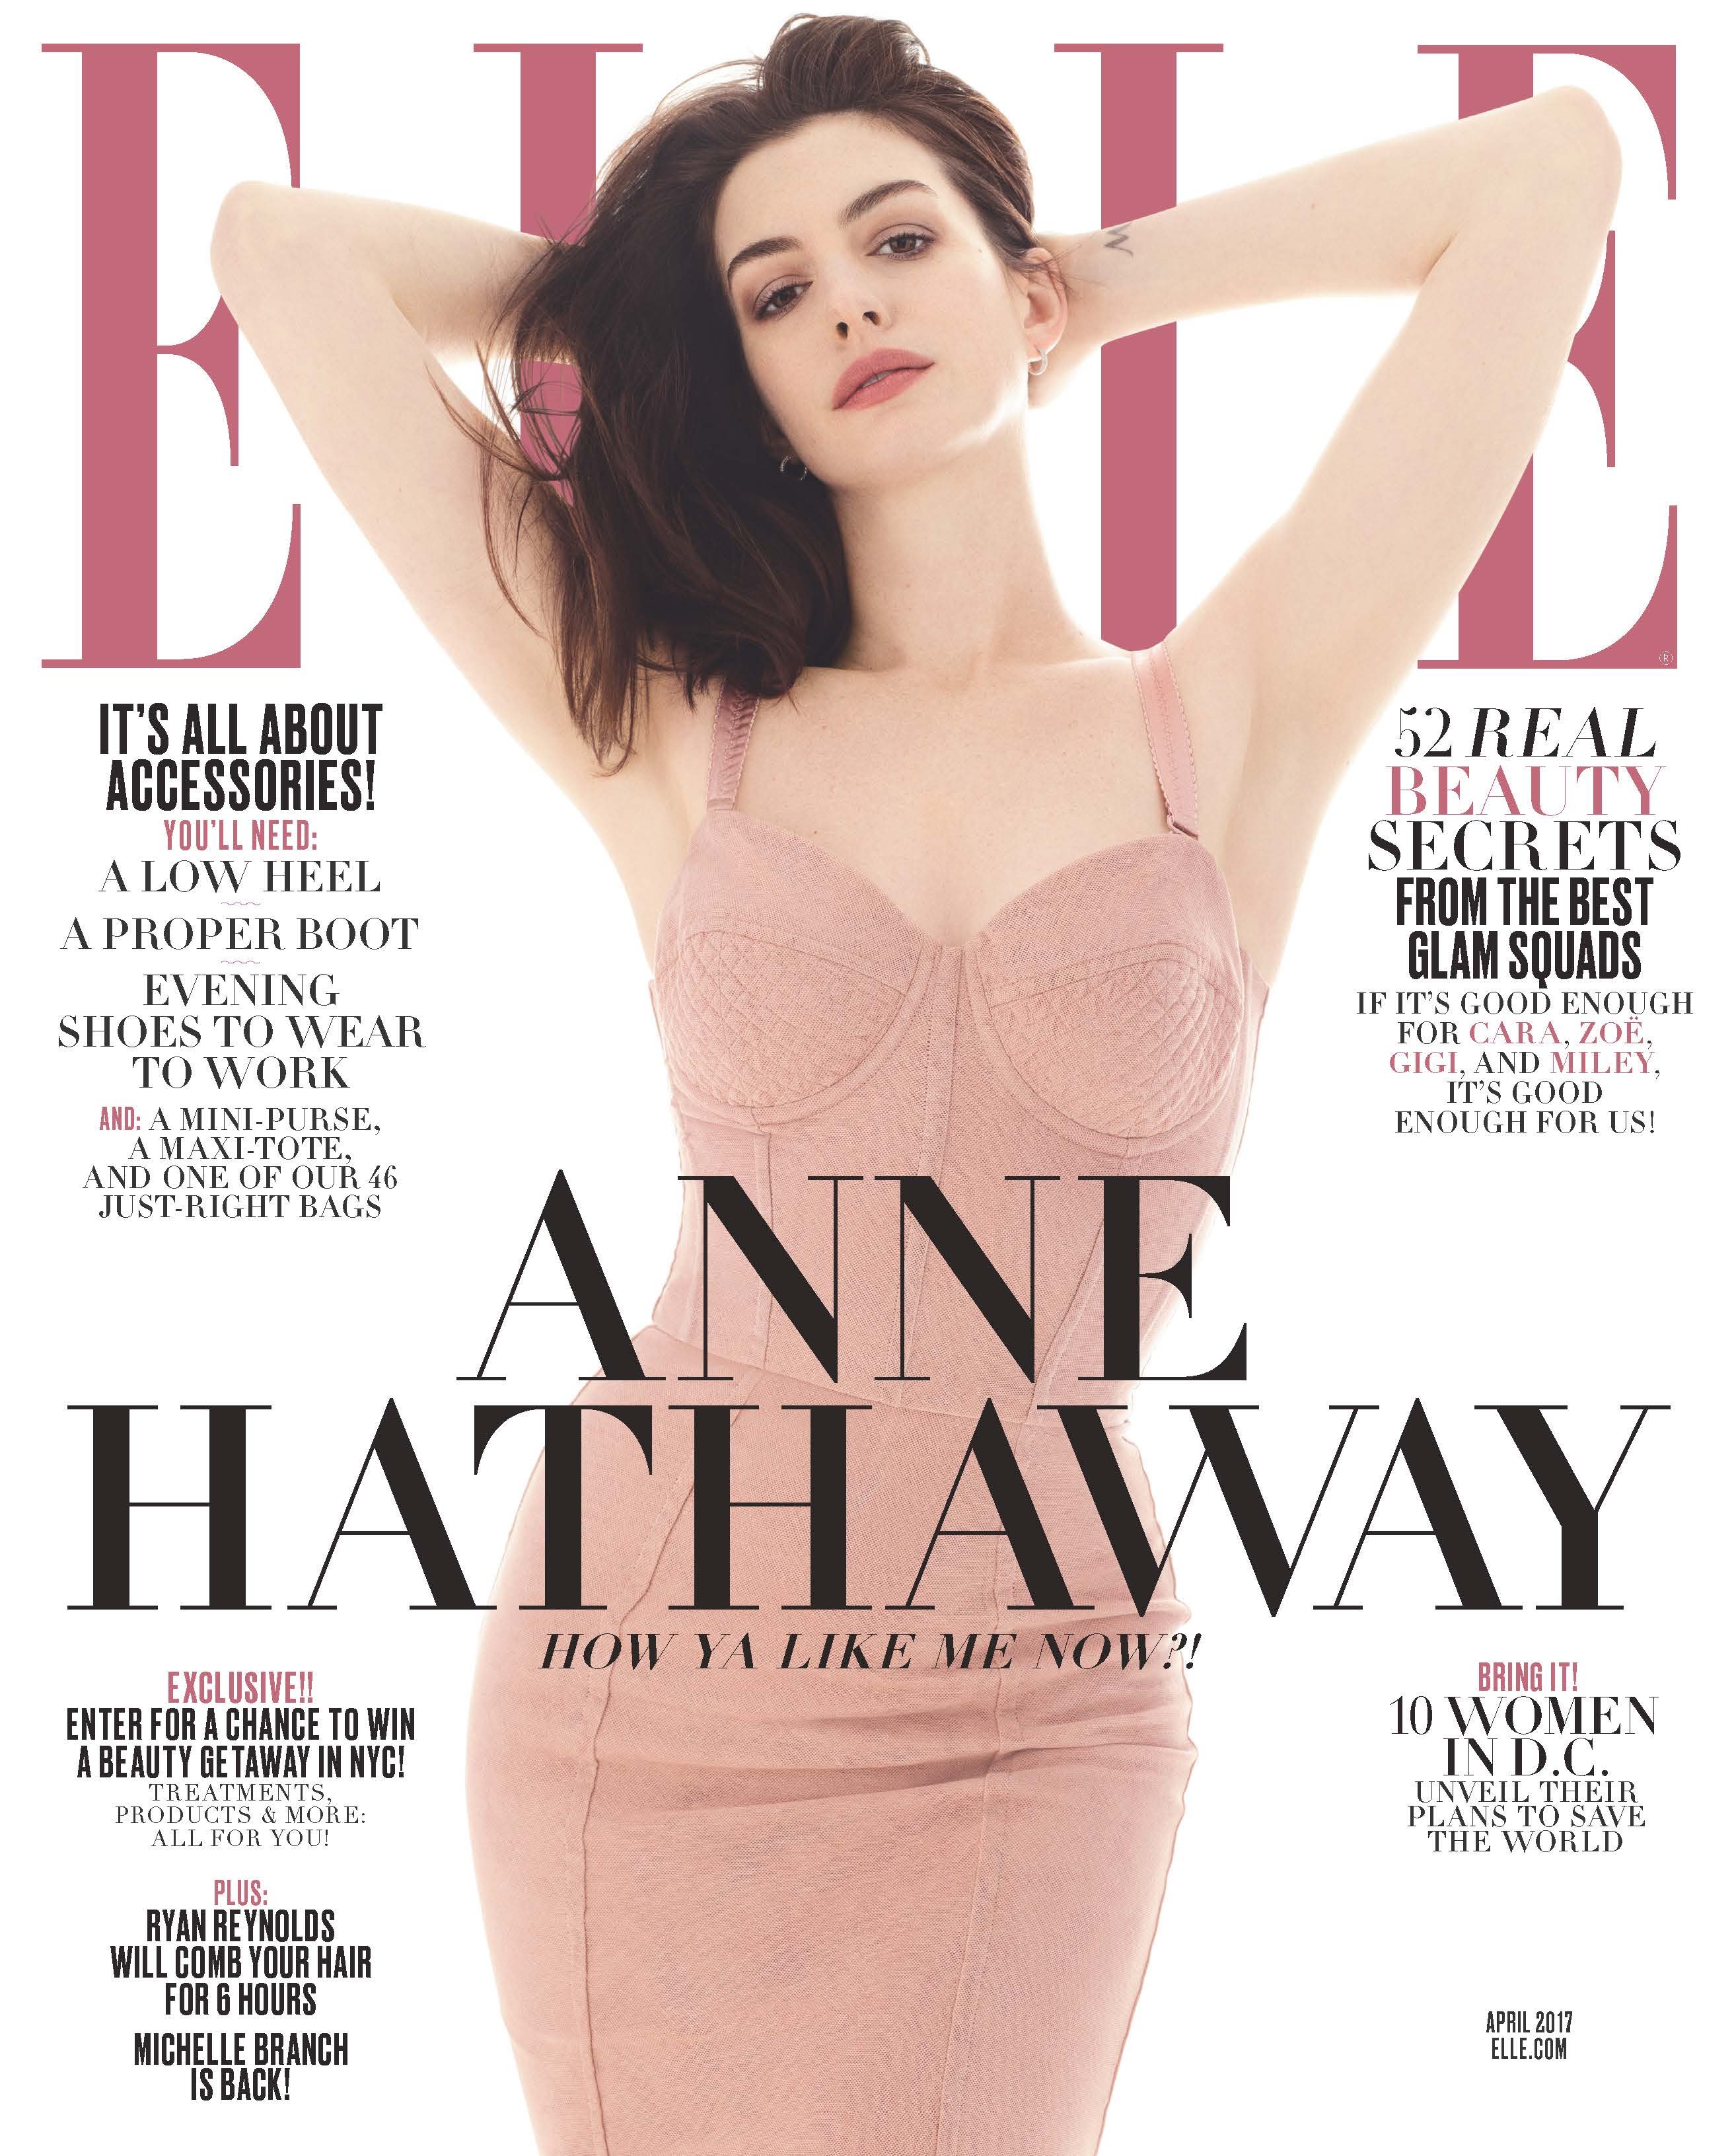 Anne Hathaway covers the April 2017 issue of Elle